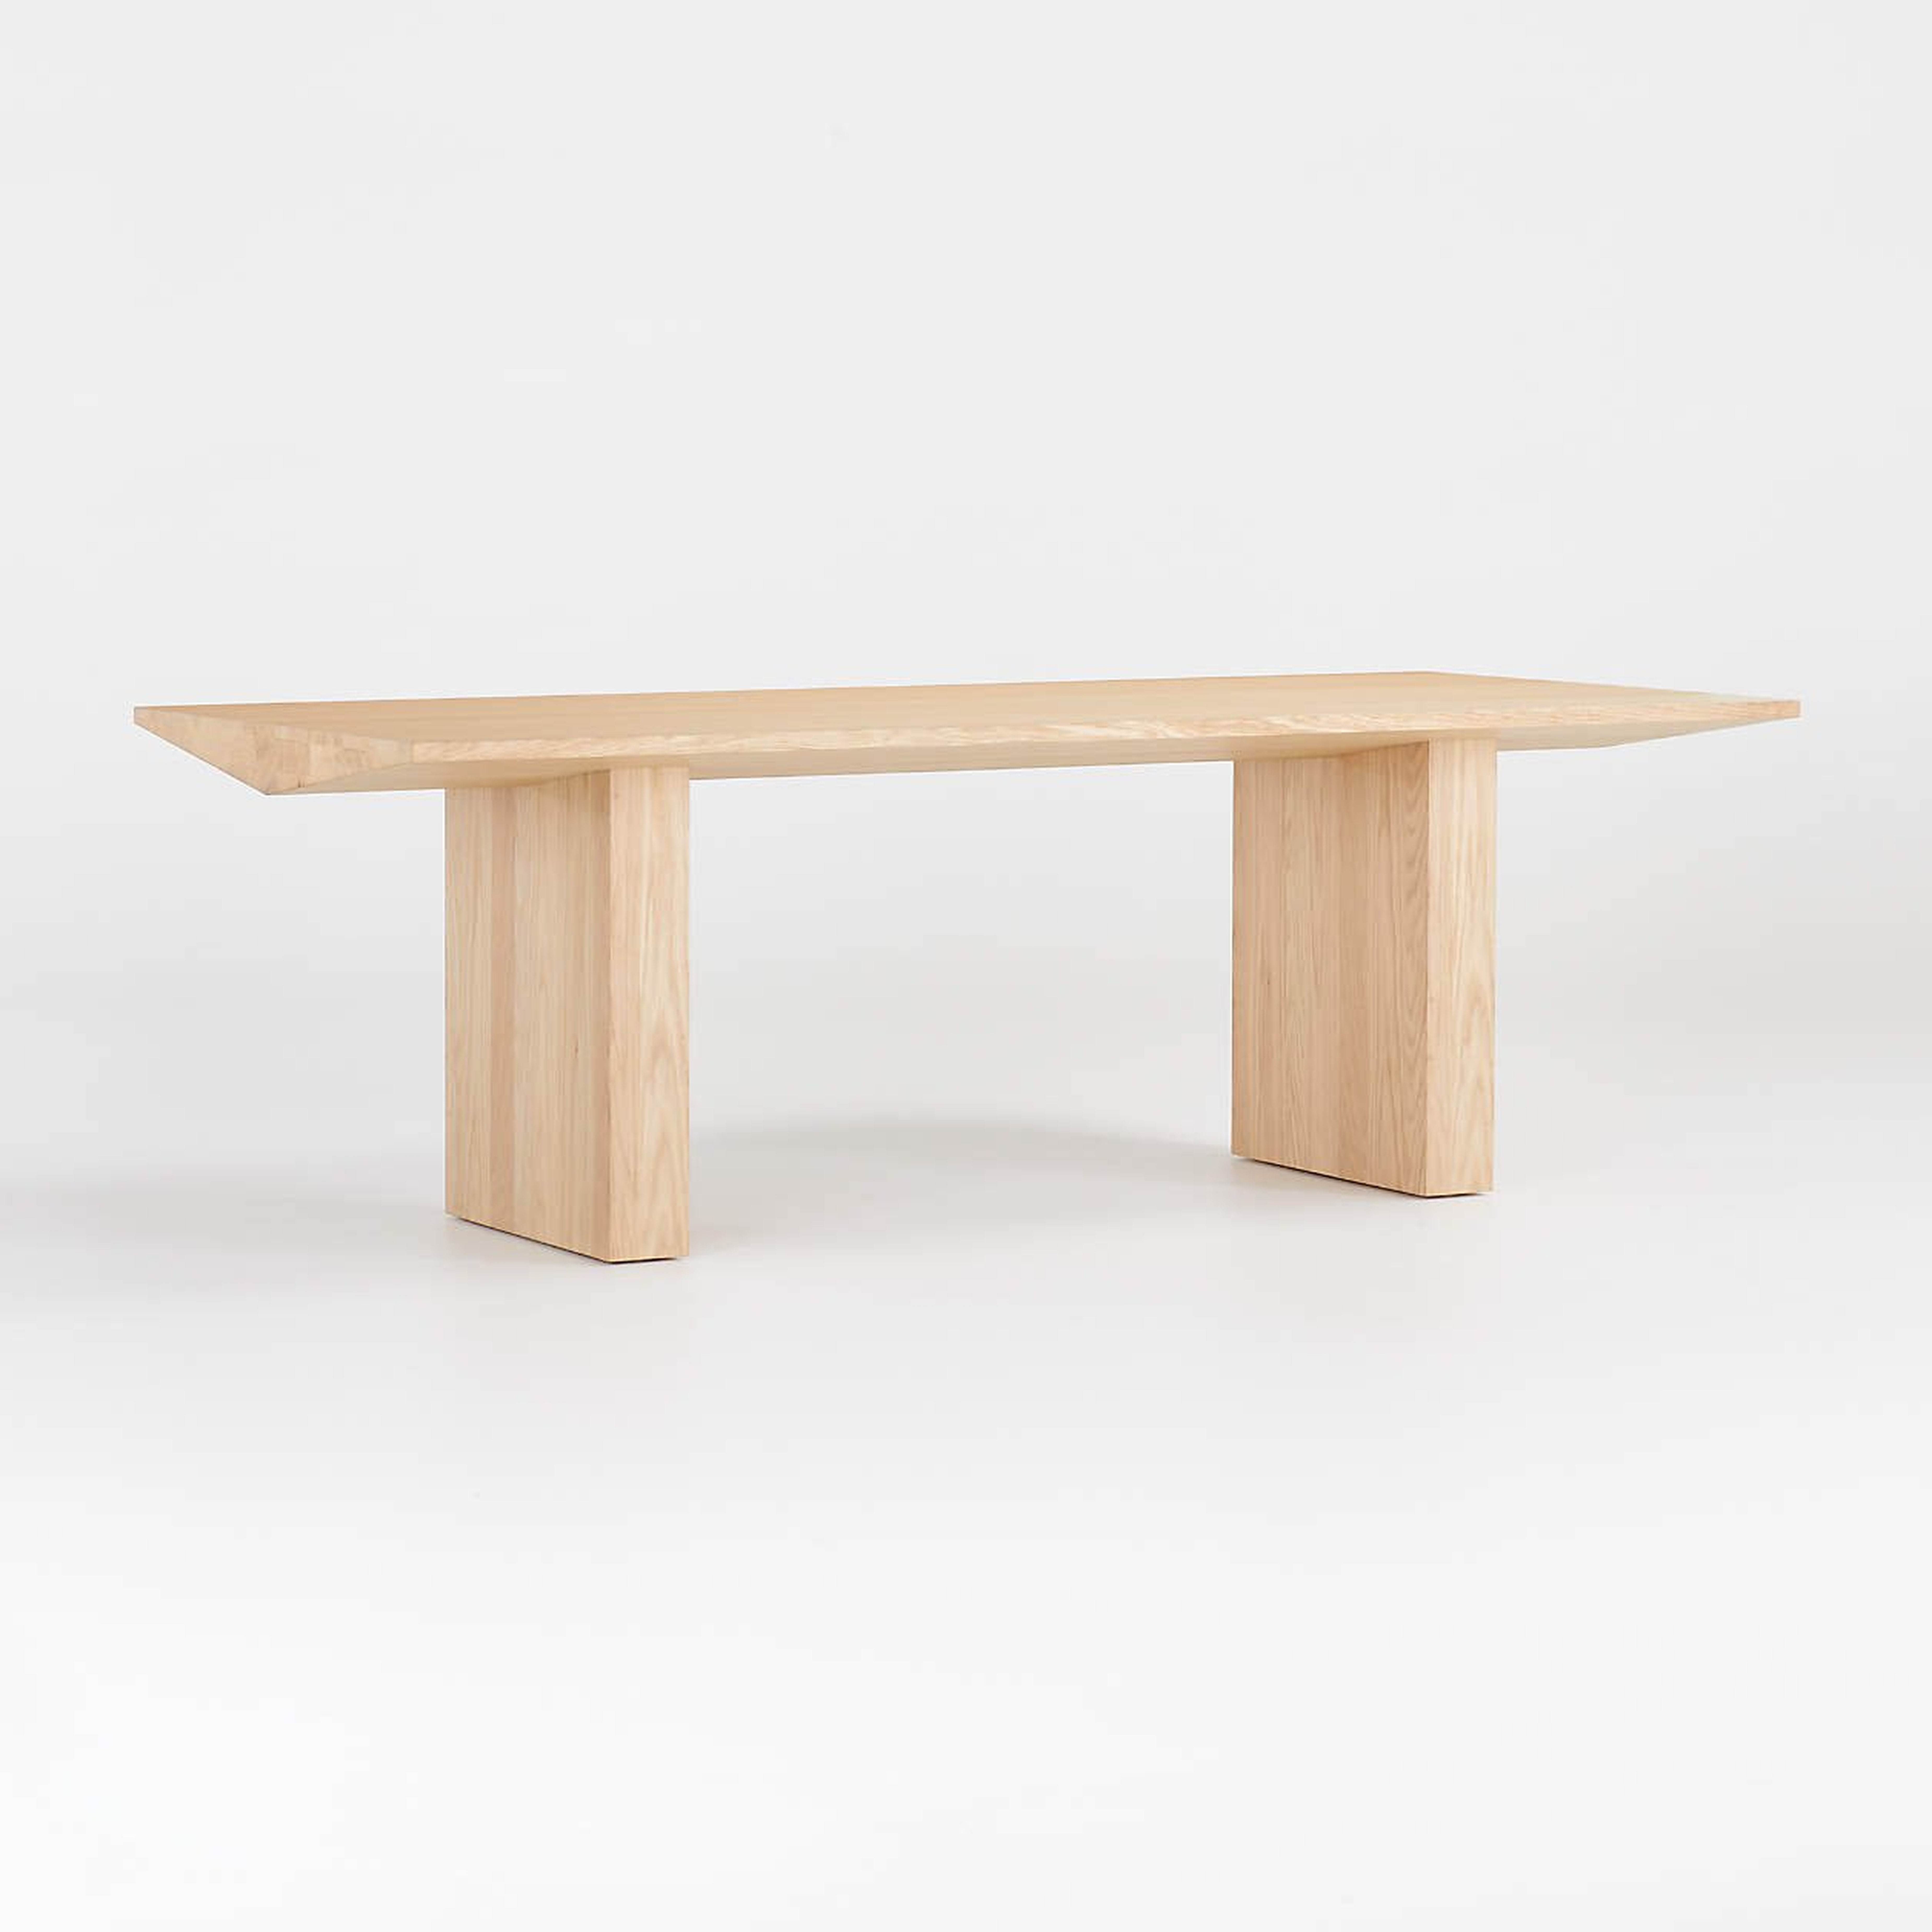 Van Natural Wood Dining Table by Leanne Ford - Crate and Barrel